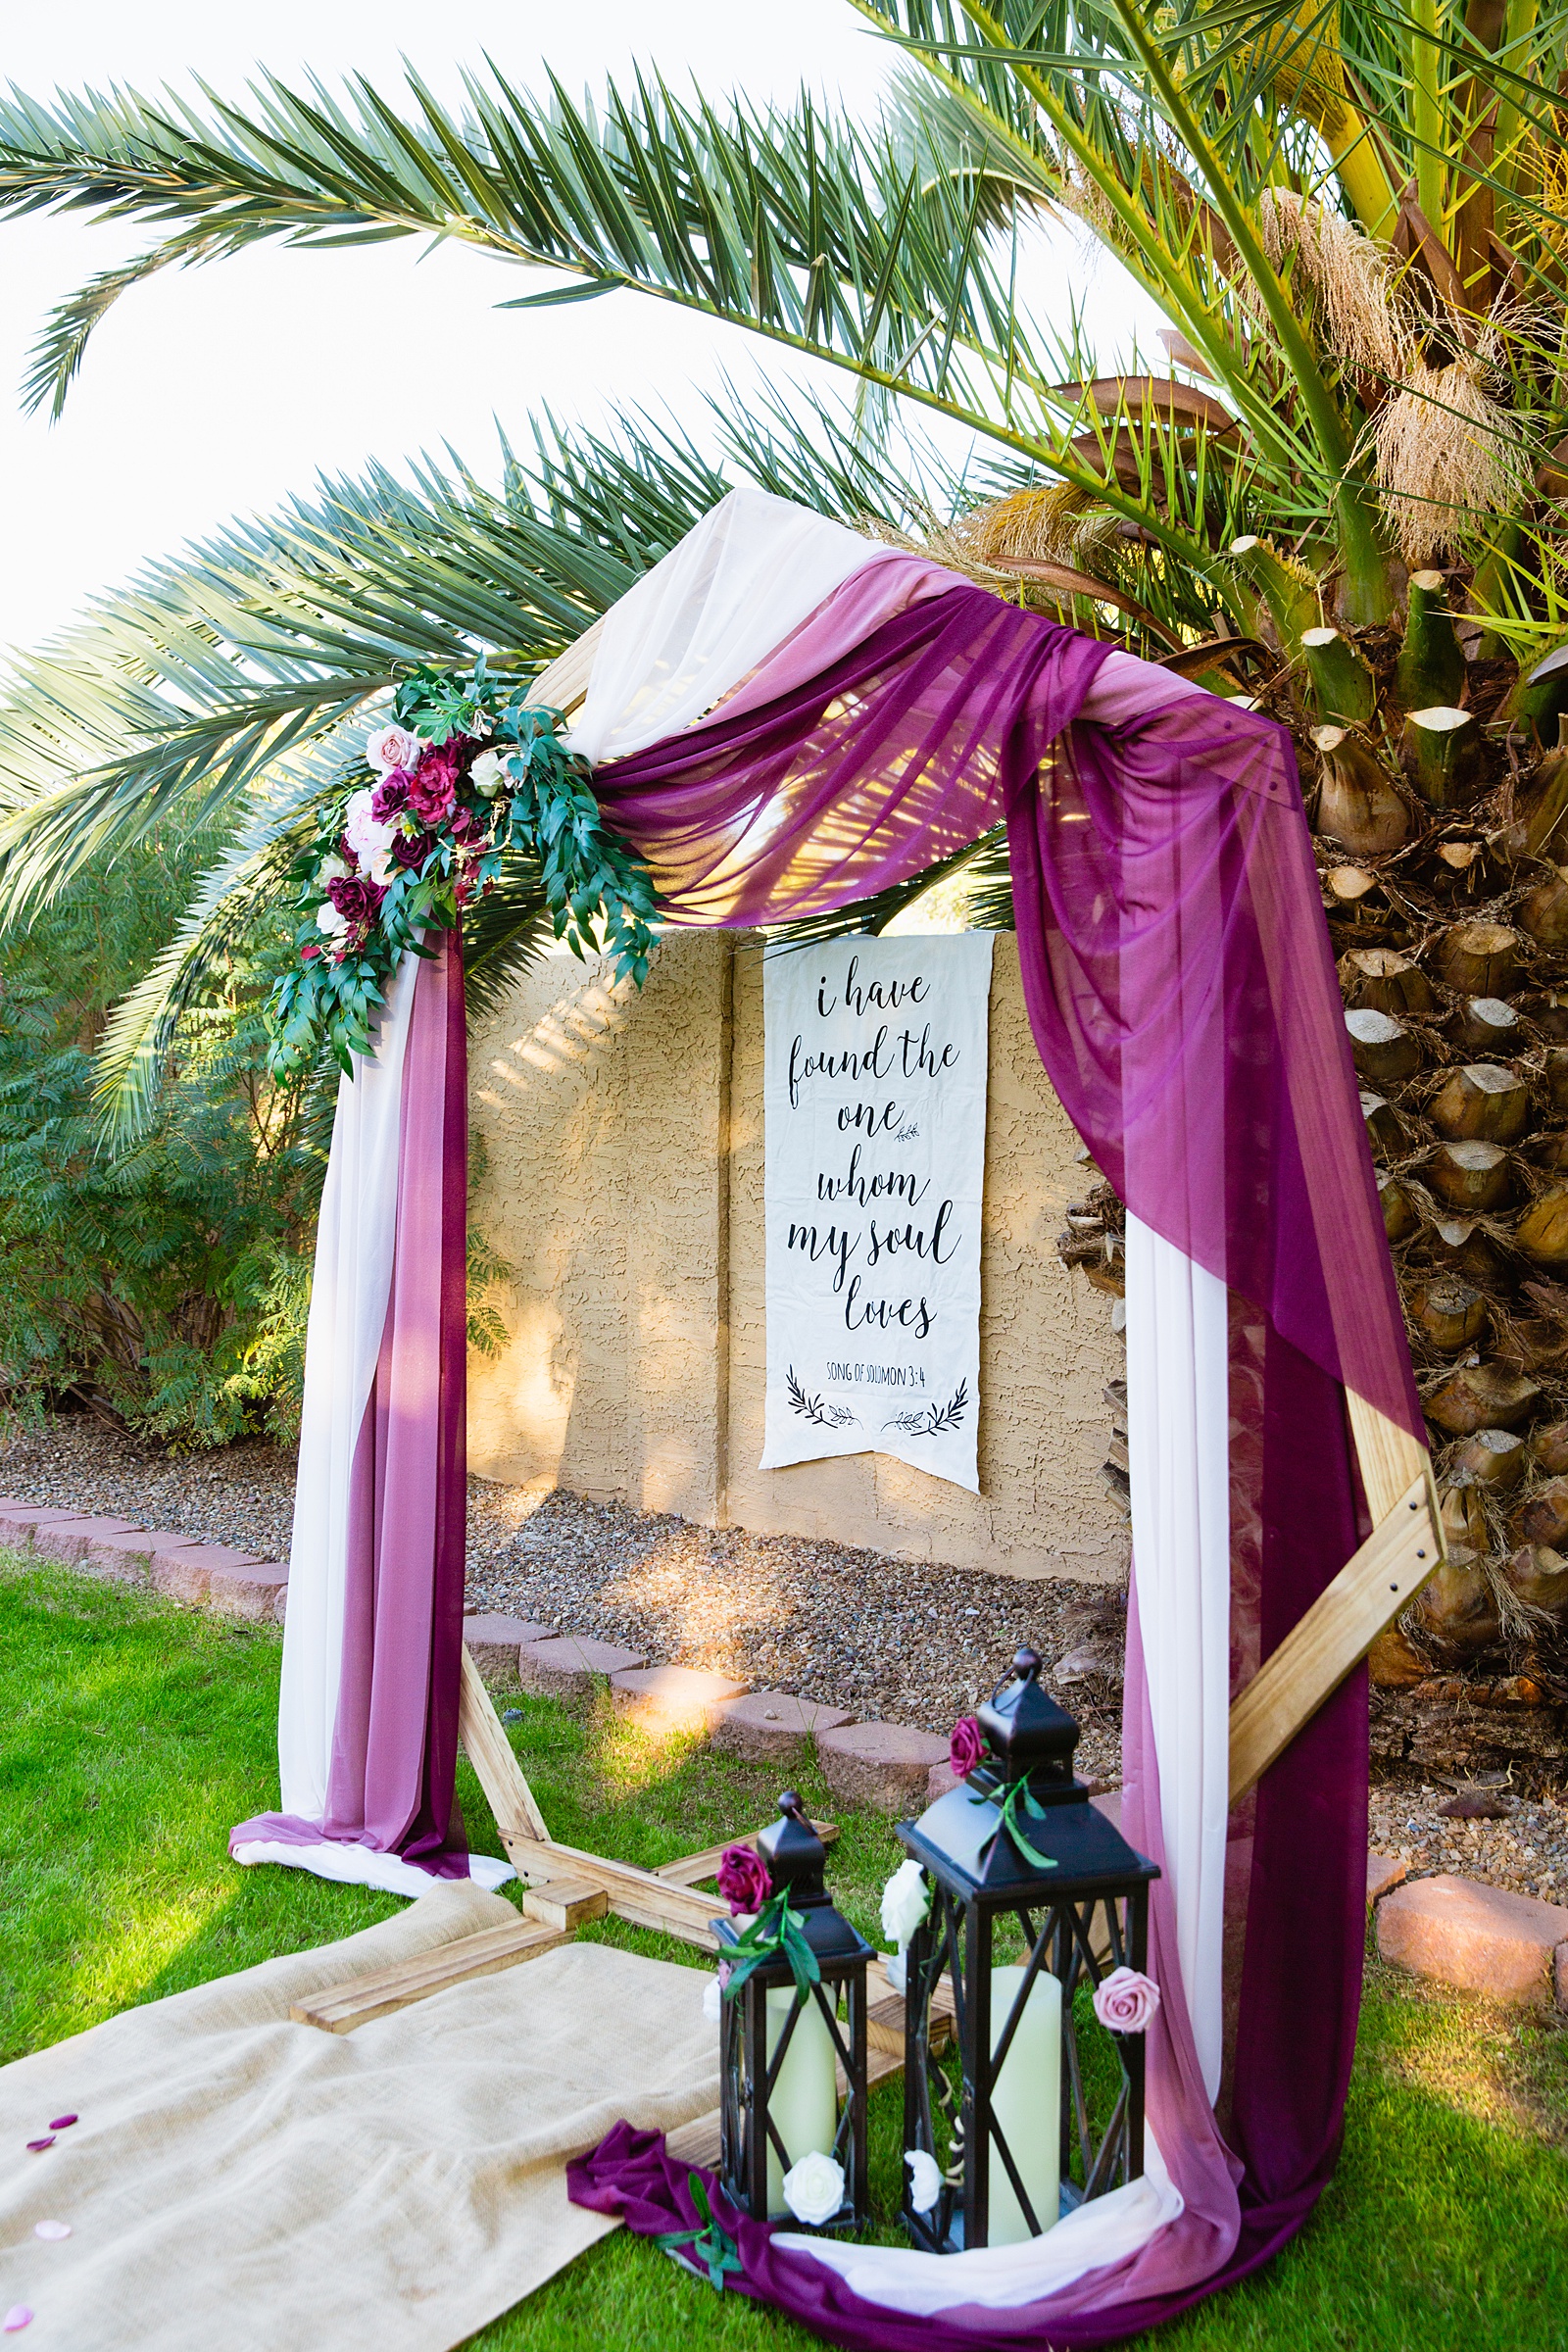 Wedding ceremony hexagon arch with maroon and white fabric and flowers at Backyard Micro by Phoenix wedding photographer PMA Photography.